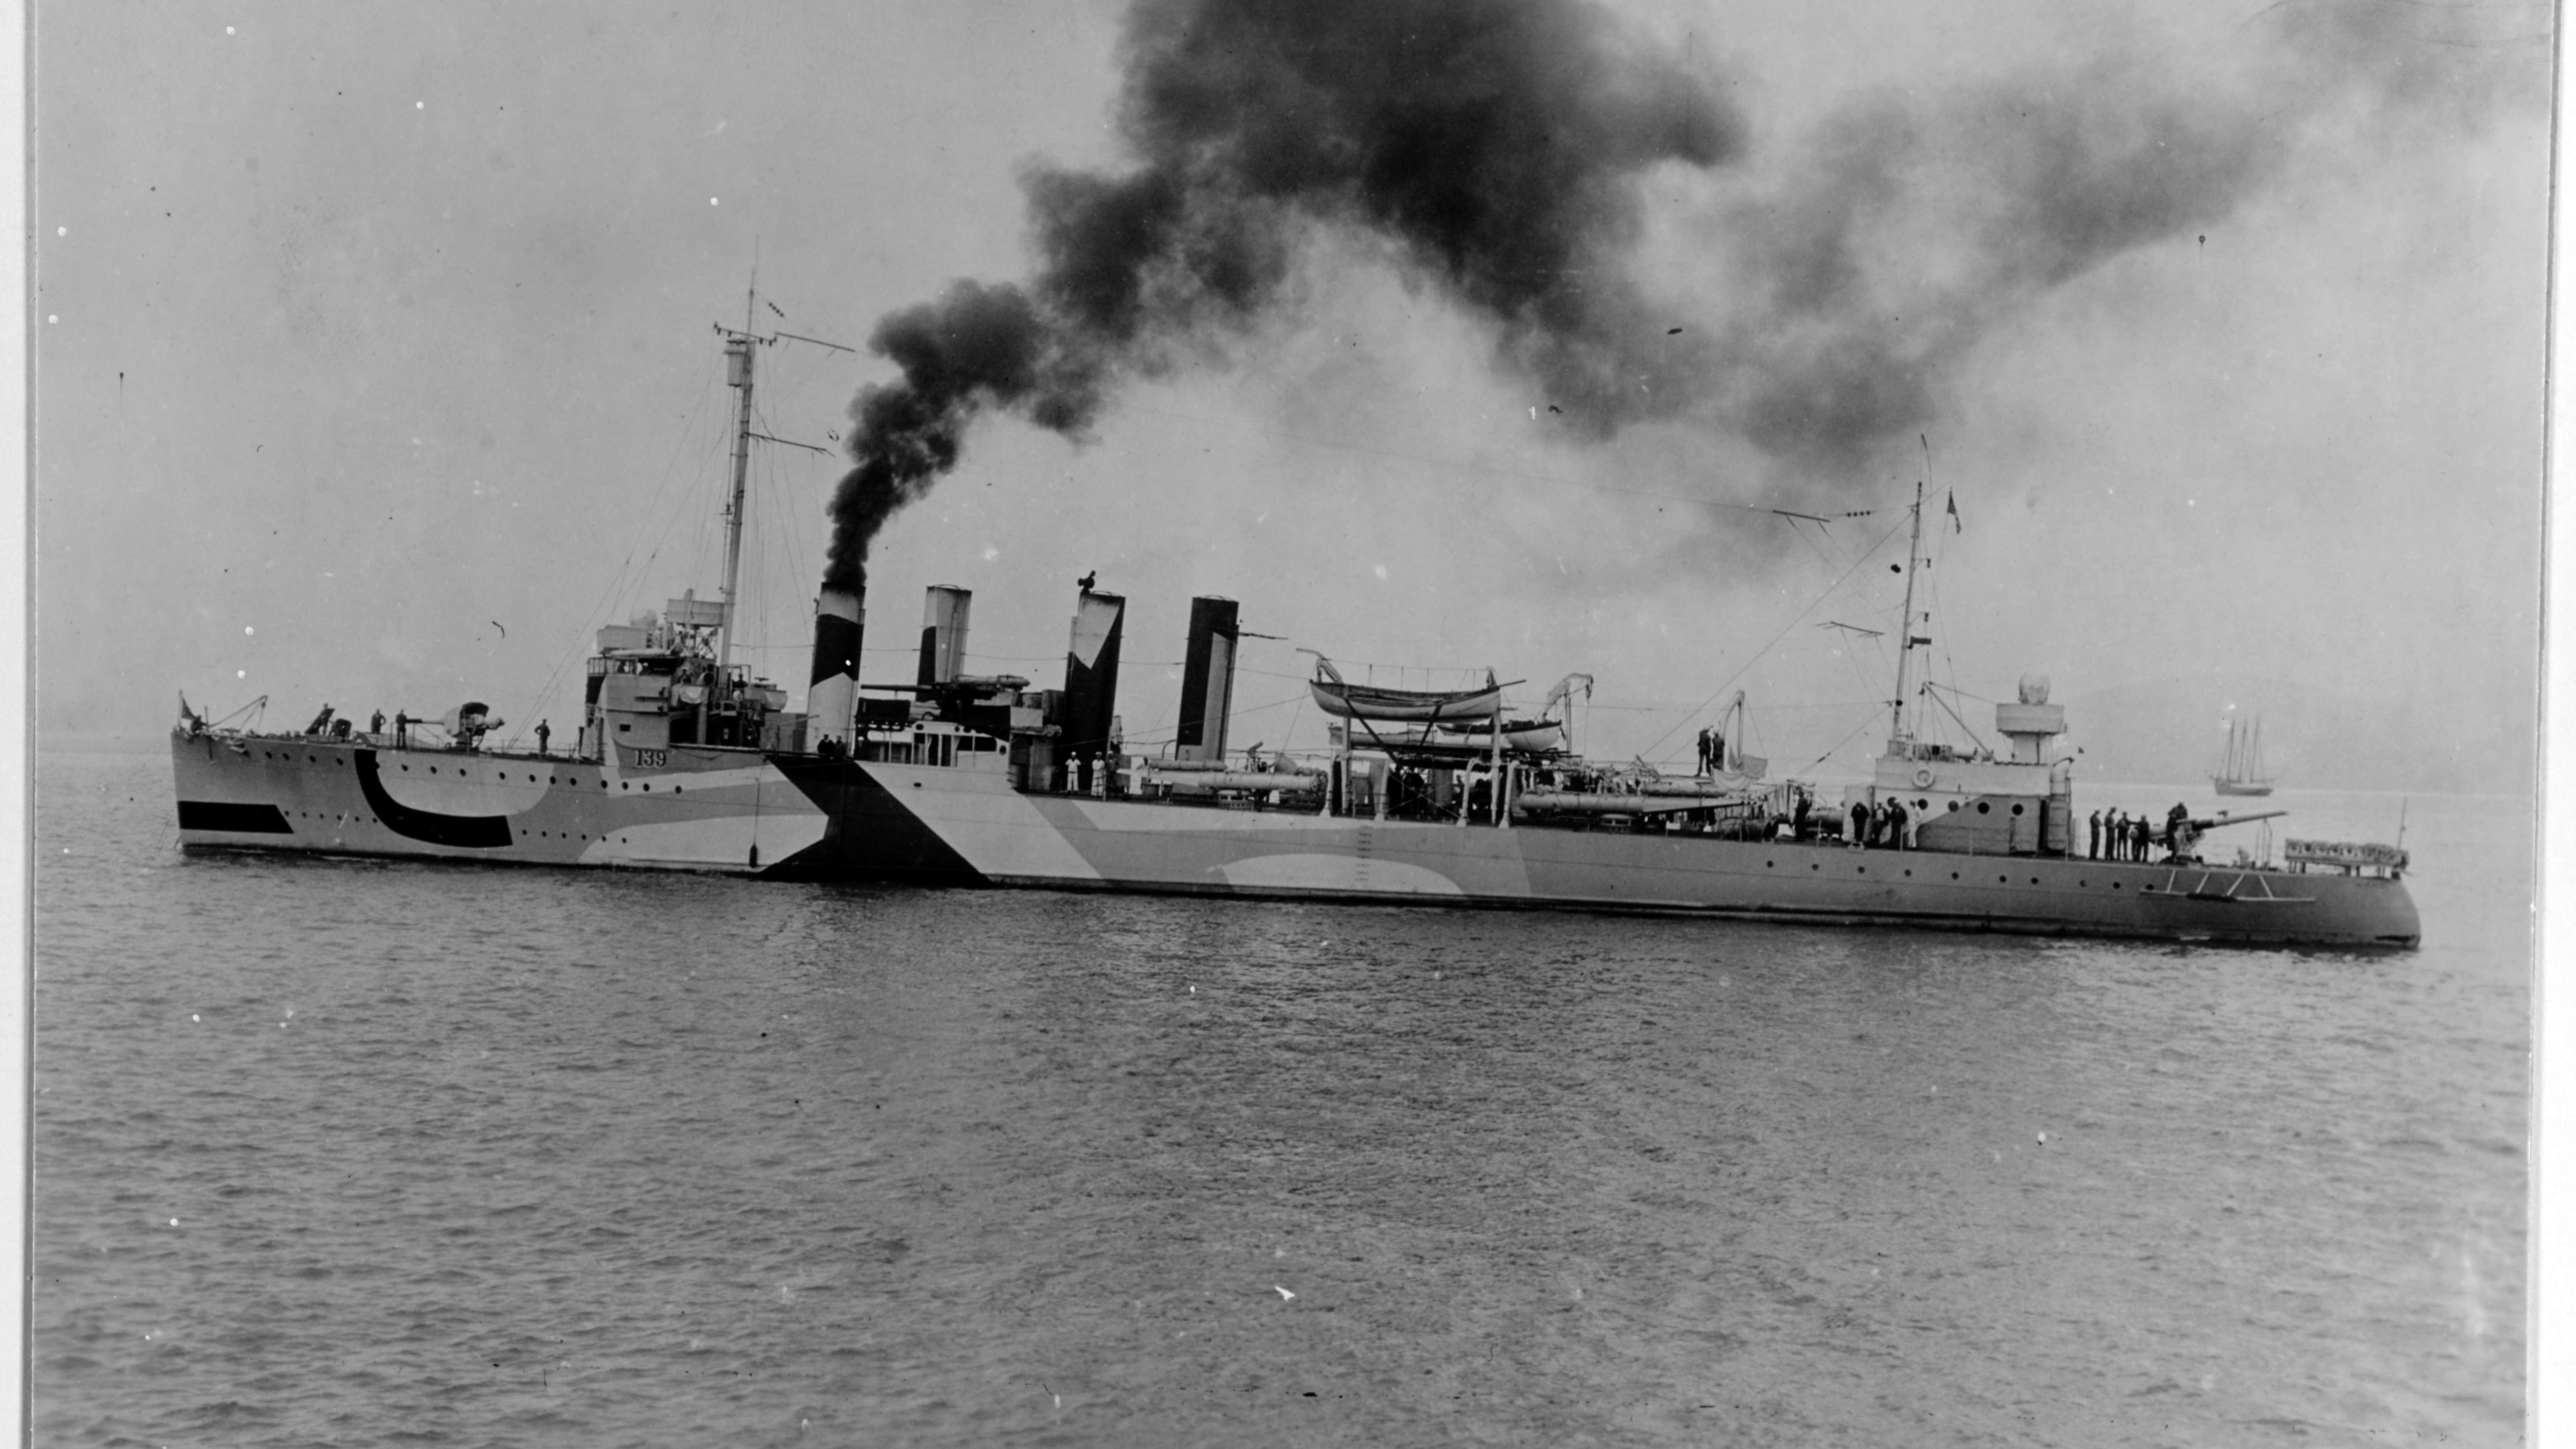 USS Ward was a World War I-era destroyer recommissioned for service in World War II. Best known for depth-charging a Japanese midget submarine just outside Pearl Harbor, Ward spent the war as a auxiliary personnel destroyer, reconfigured as a fast troop transport. The APDs were nicknamed Green Dragons because of their green paint base and camouflage scheme. Ward was attacked and suffered severe damage during the Leyte campaign in 1944. She was deliberately sunk December 7, 1944. (Naval History and Heritage Command)